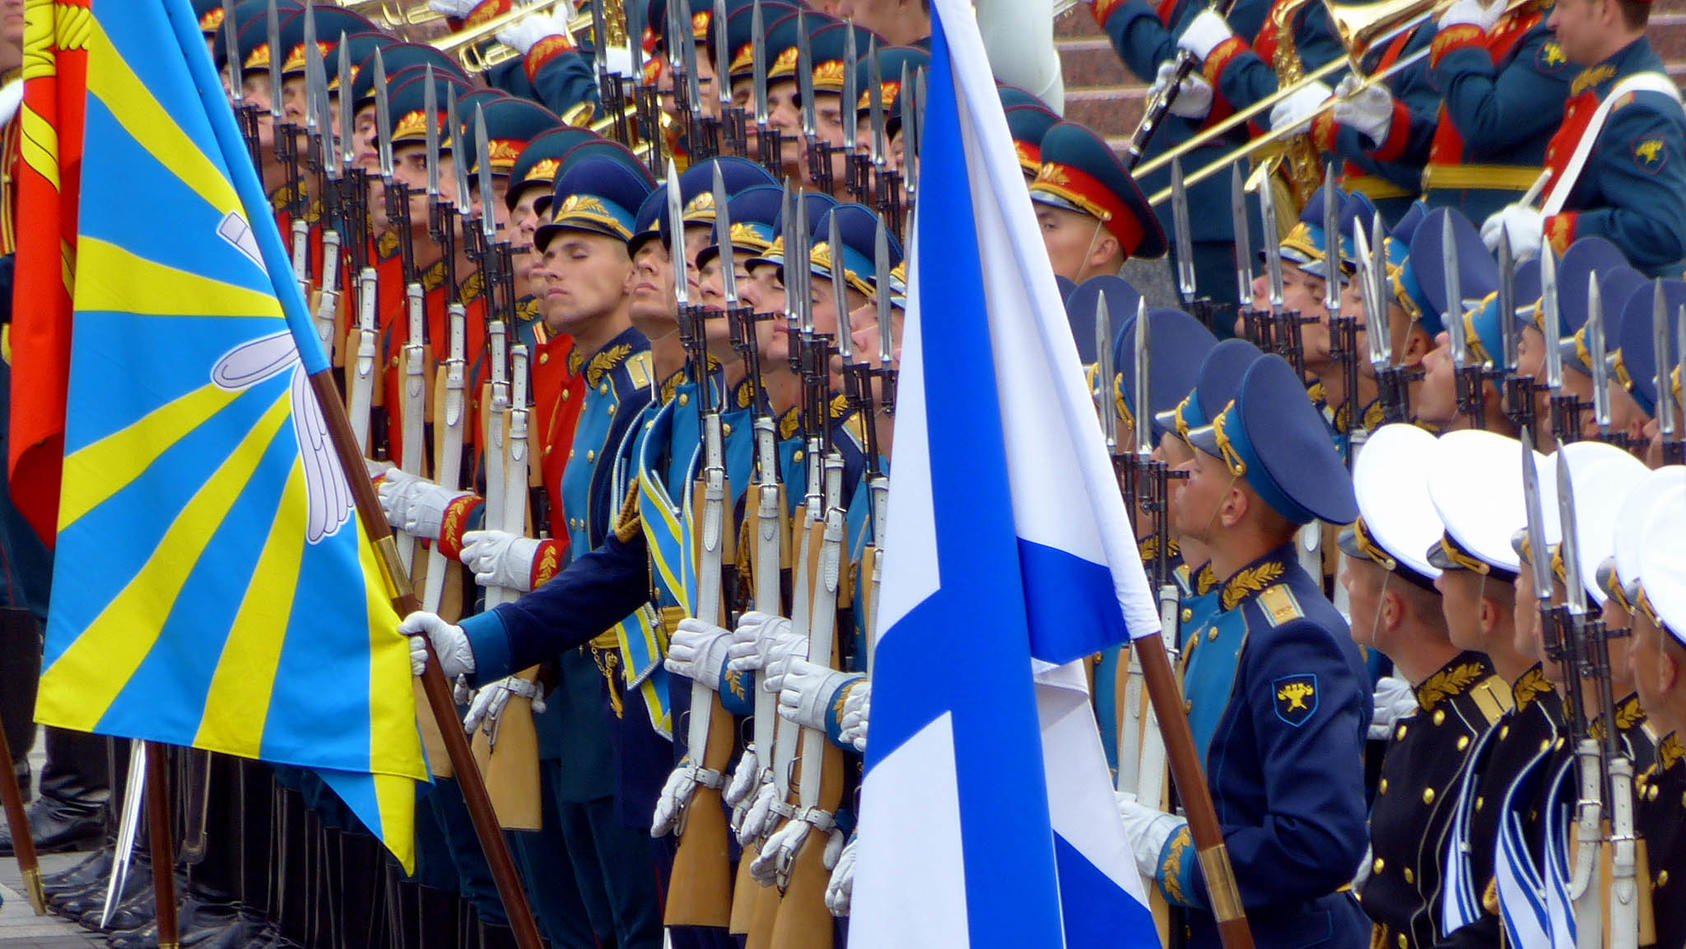 Troops present arms at Russia’s annual World War II victory parade in 2012. Much of Russia’s political culture and leadership maintain that Russia holds a natural right to rule or dominate its neighbors—especially Ukraine. (Mariano Mantel/CC License 2.0)